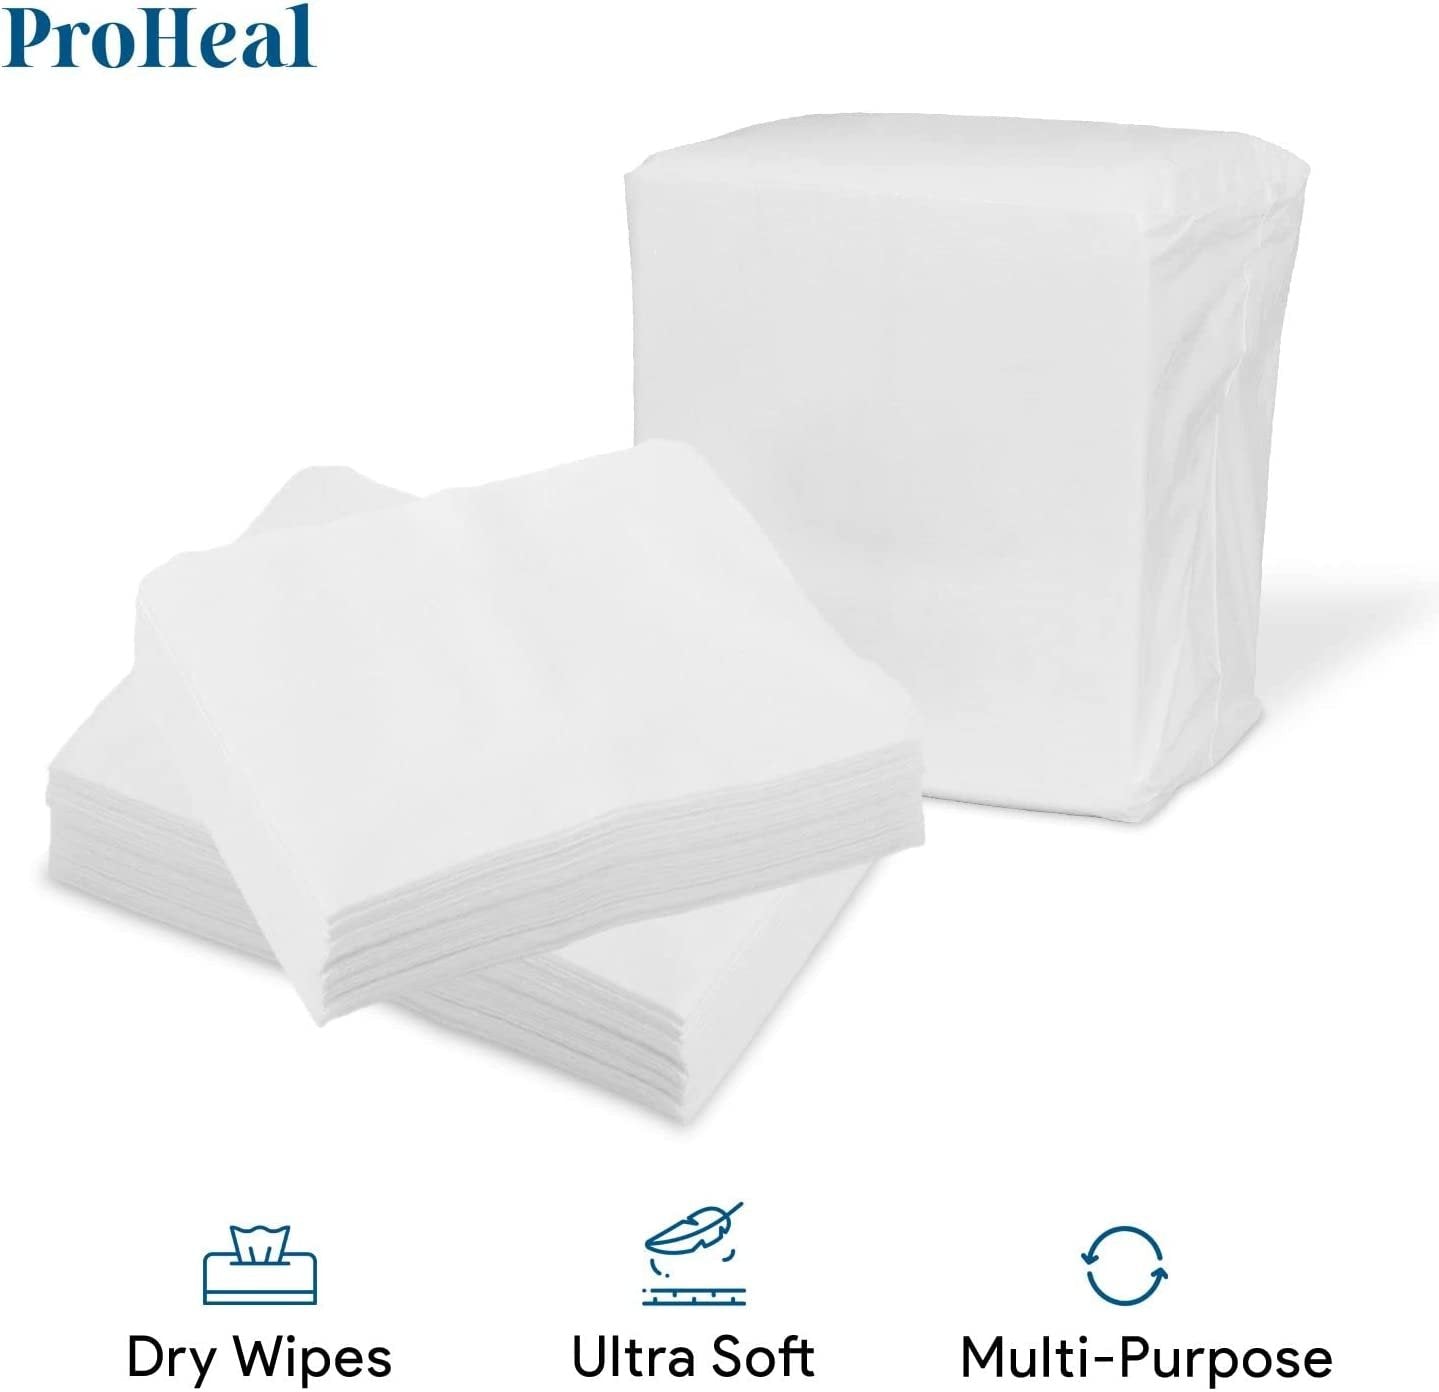 Disposable Dry Wipes, 500 Pack – Ultra Soft Non-Moistened Cleansing Cloths for Adults, Incontinence, Baby Care, Makeup Removal – 9.5" x 13.5" - Hospital Grade, Durable – by ProHeal